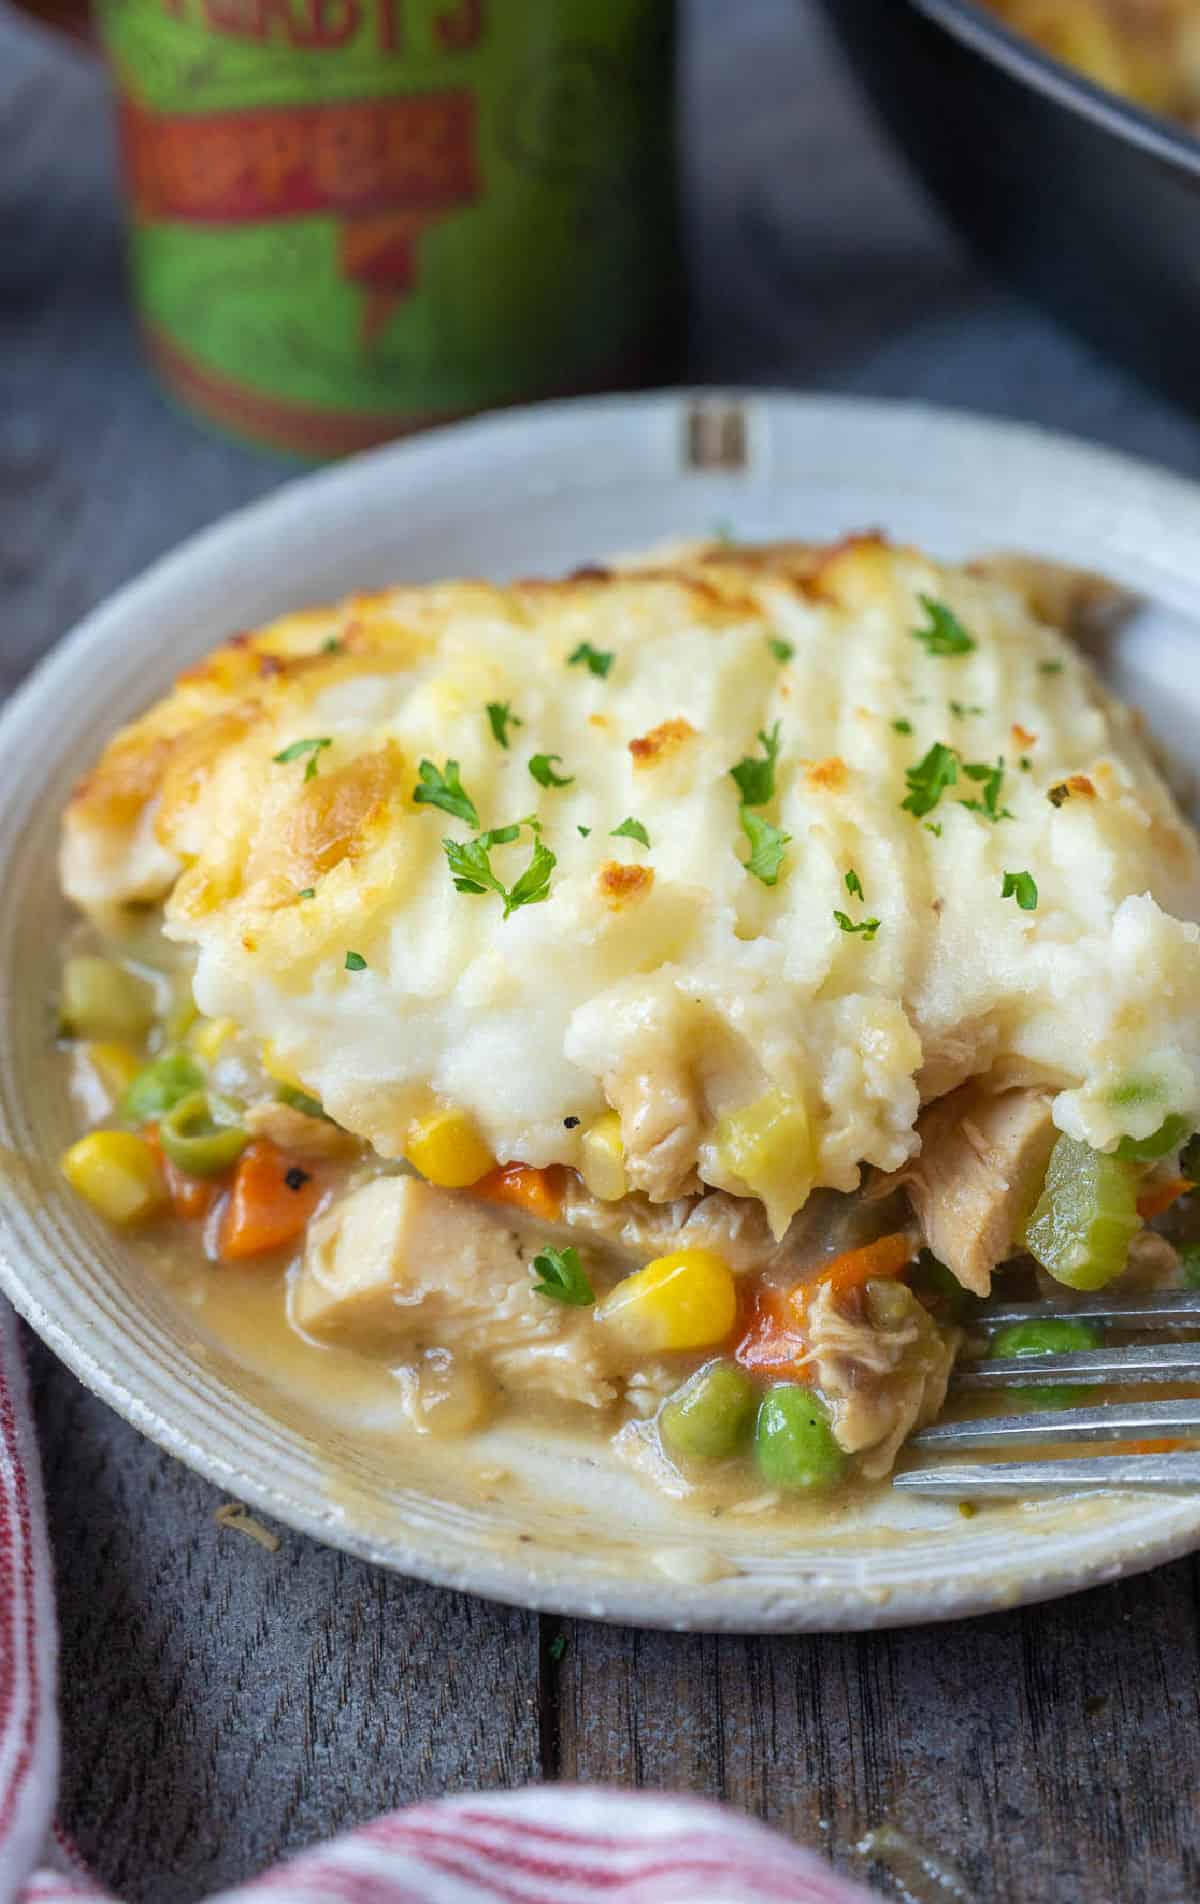 Turkey shepherd's pie on a plate with a fork.